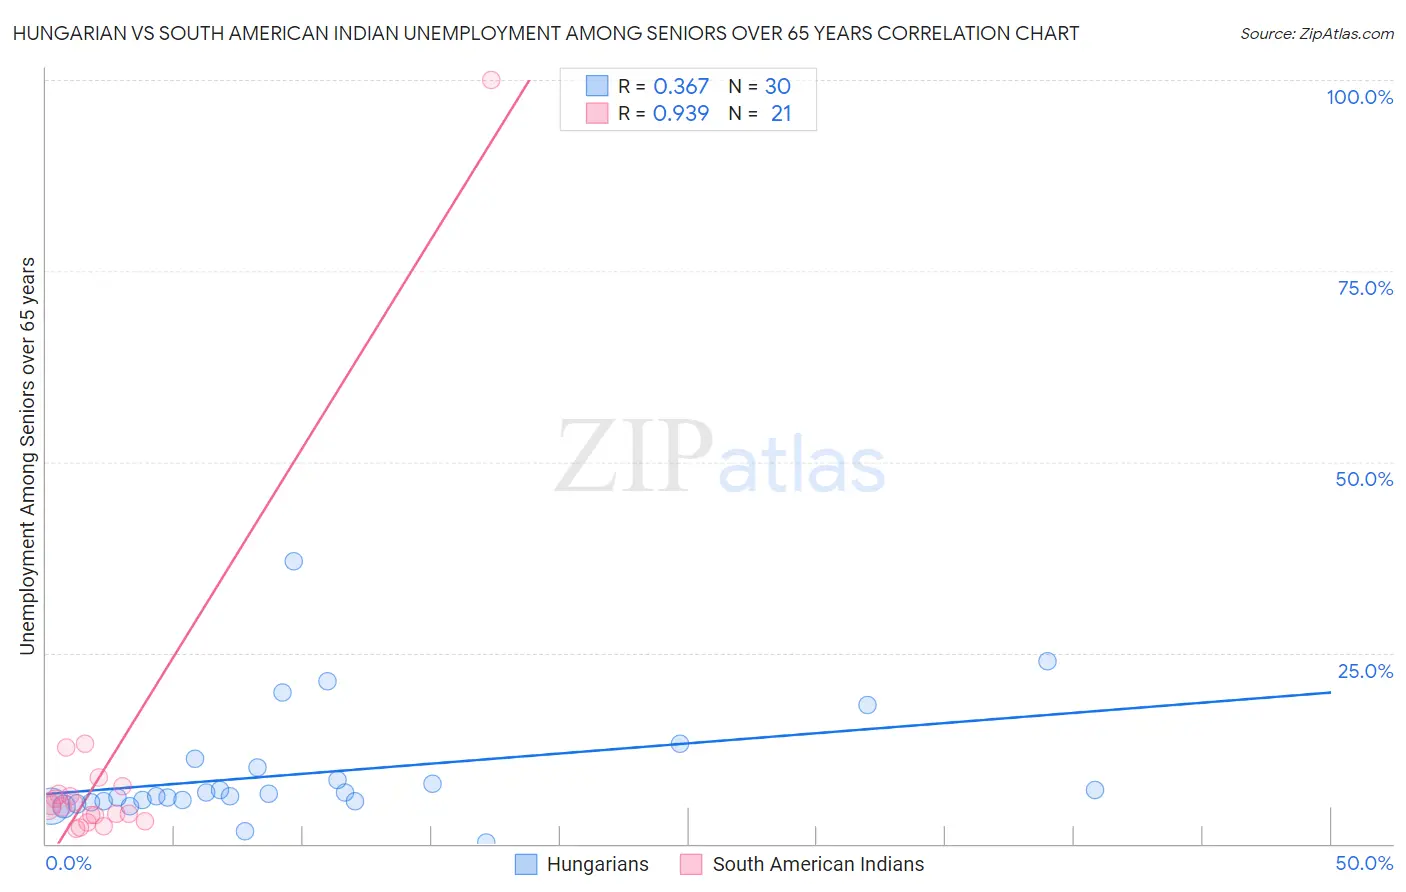 Hungarian vs South American Indian Unemployment Among Seniors over 65 years